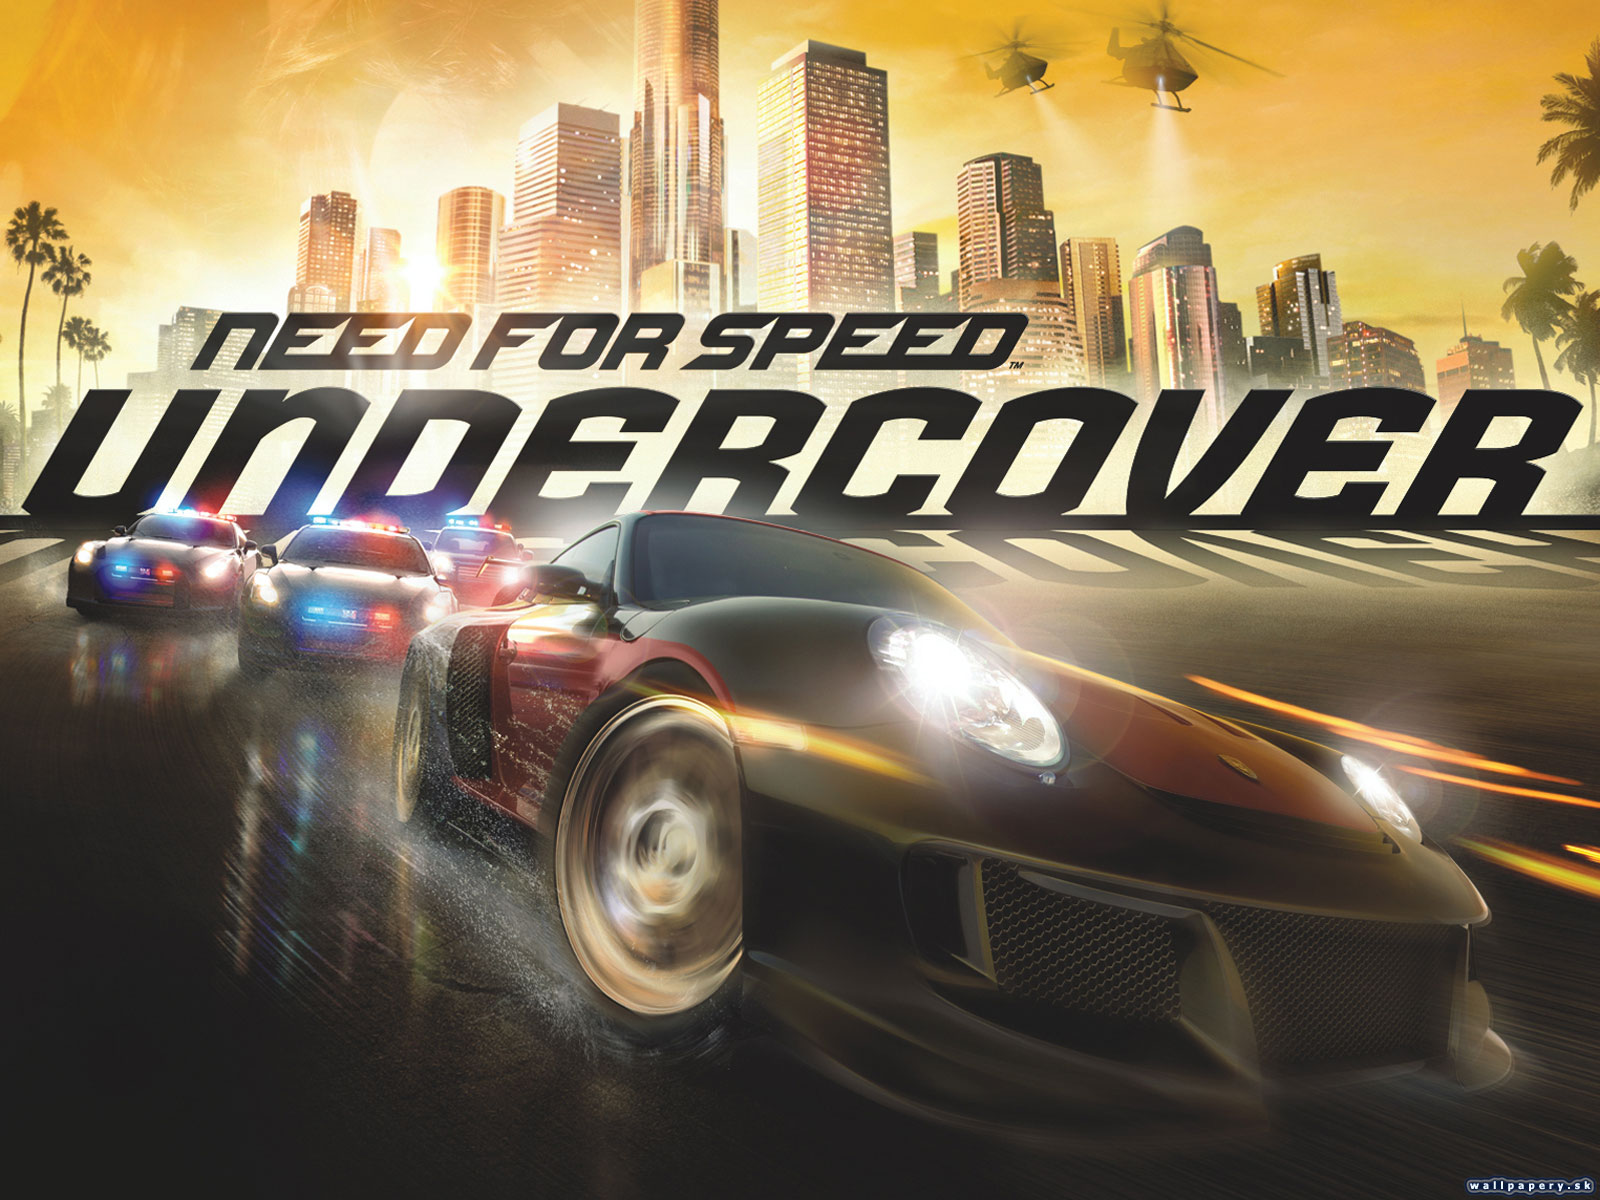 Need for Speed: Undercover - wallpaper 6